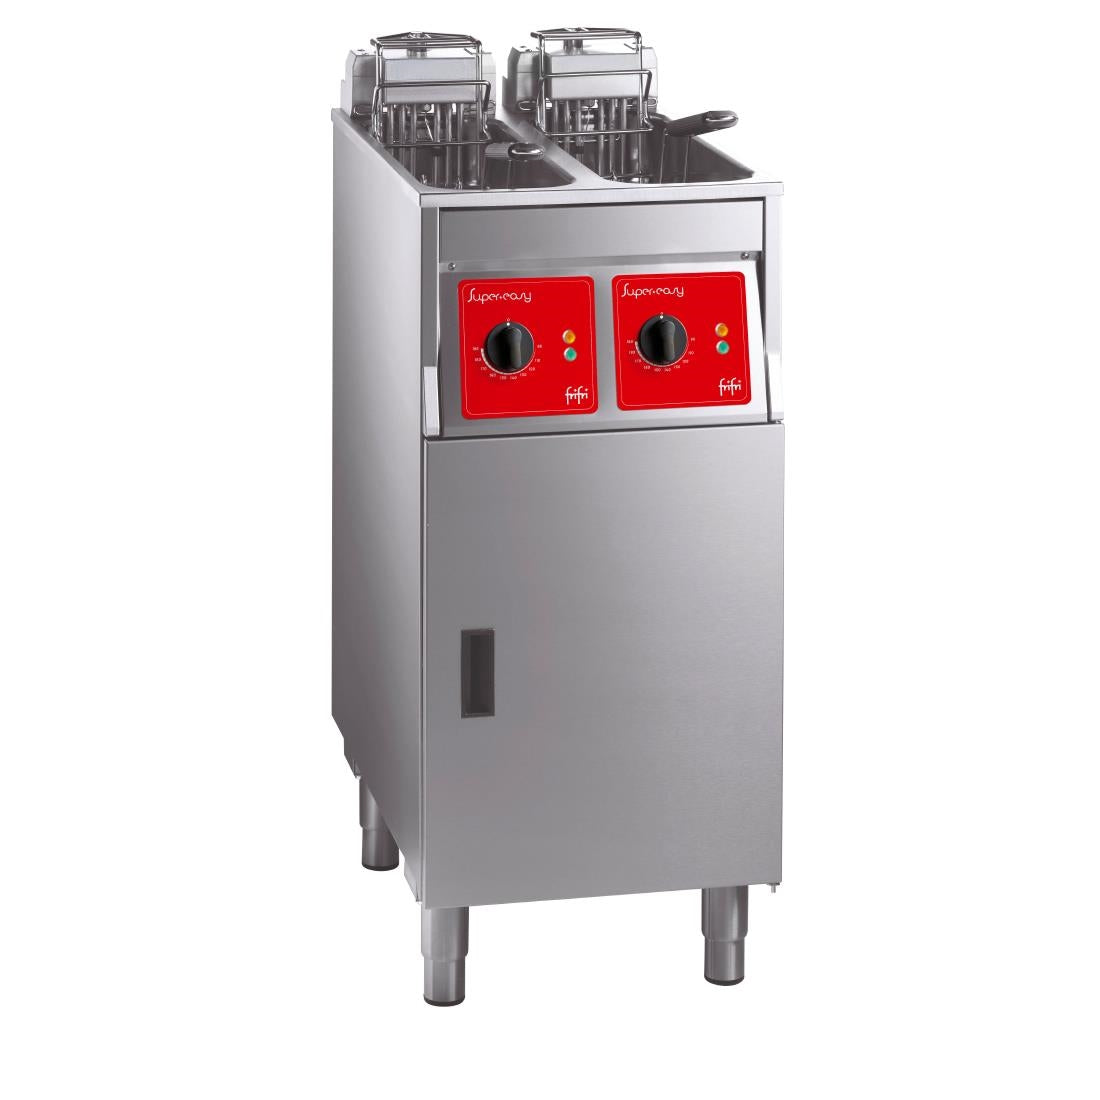 HS062-1PH FriFri Super Easy 422 Electric Free-Standing Twin Tank Fryer with Filtration 2 Baskets 2x 7.5kW - Single Phase